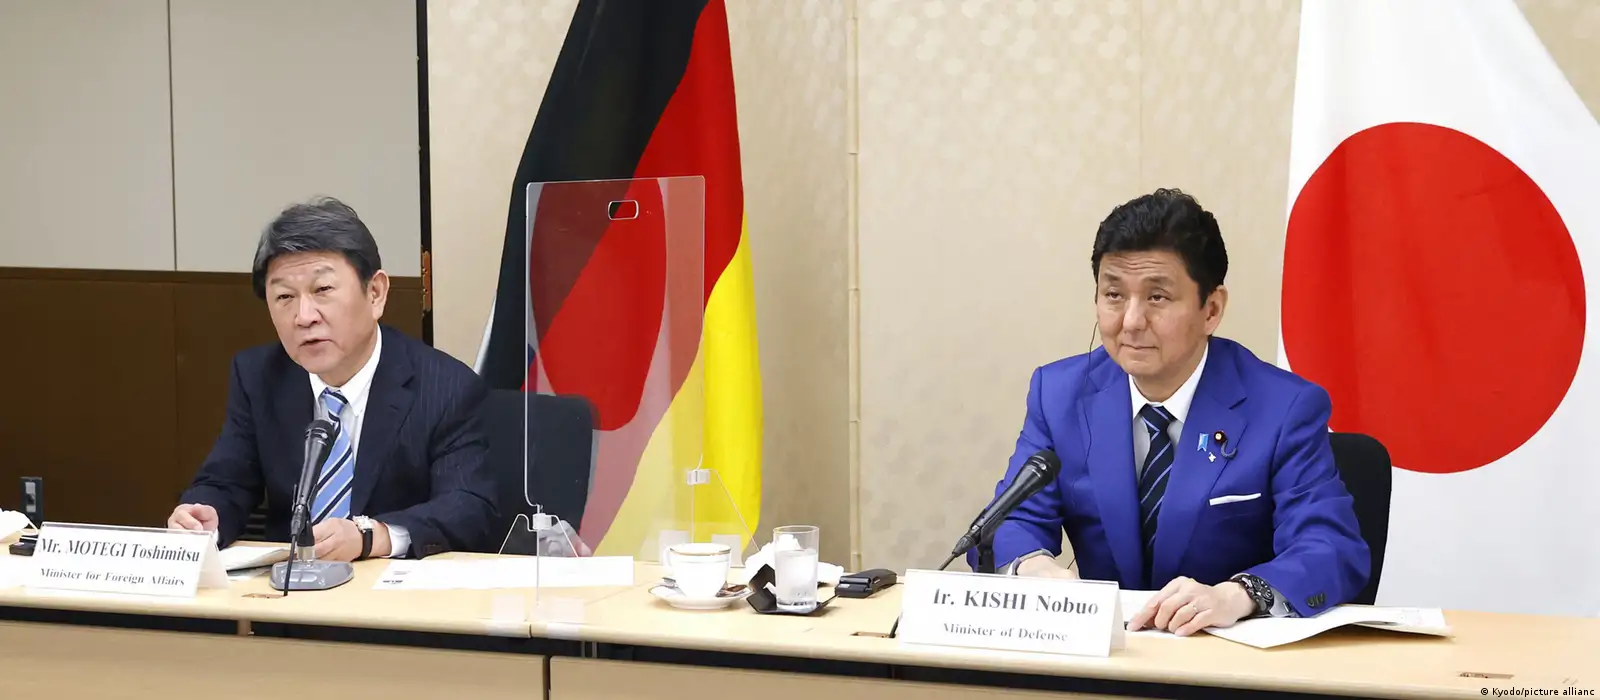 Japan seeks Germany's help to counter China – DW – 04142021